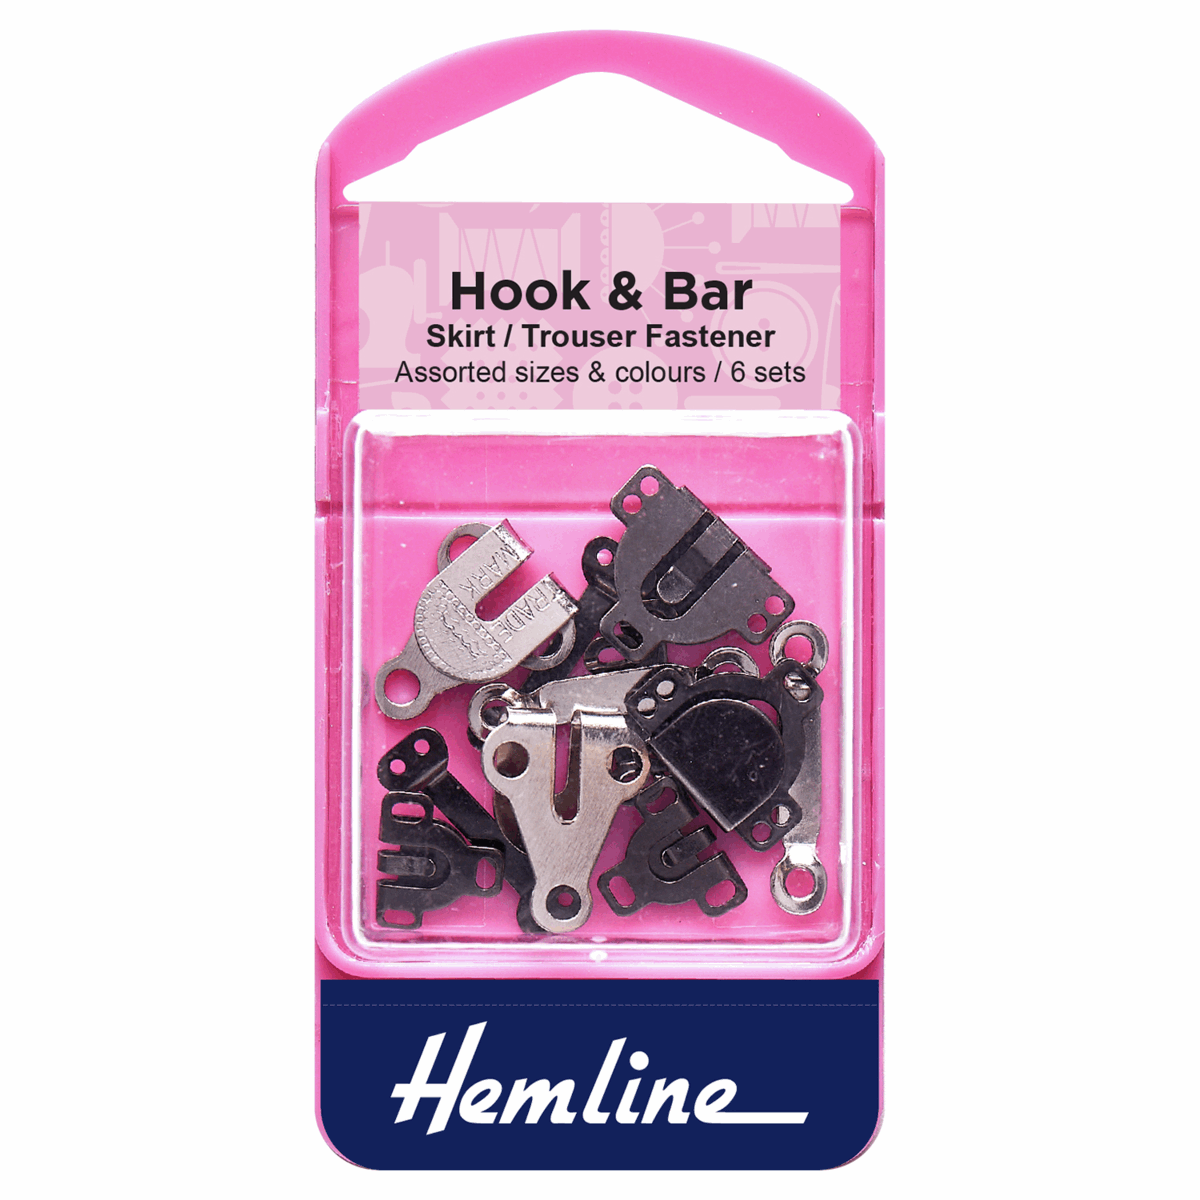 Hook and Bar - Skirt / Trouser Fastener: ASSORTED SIZES (6 Sets)